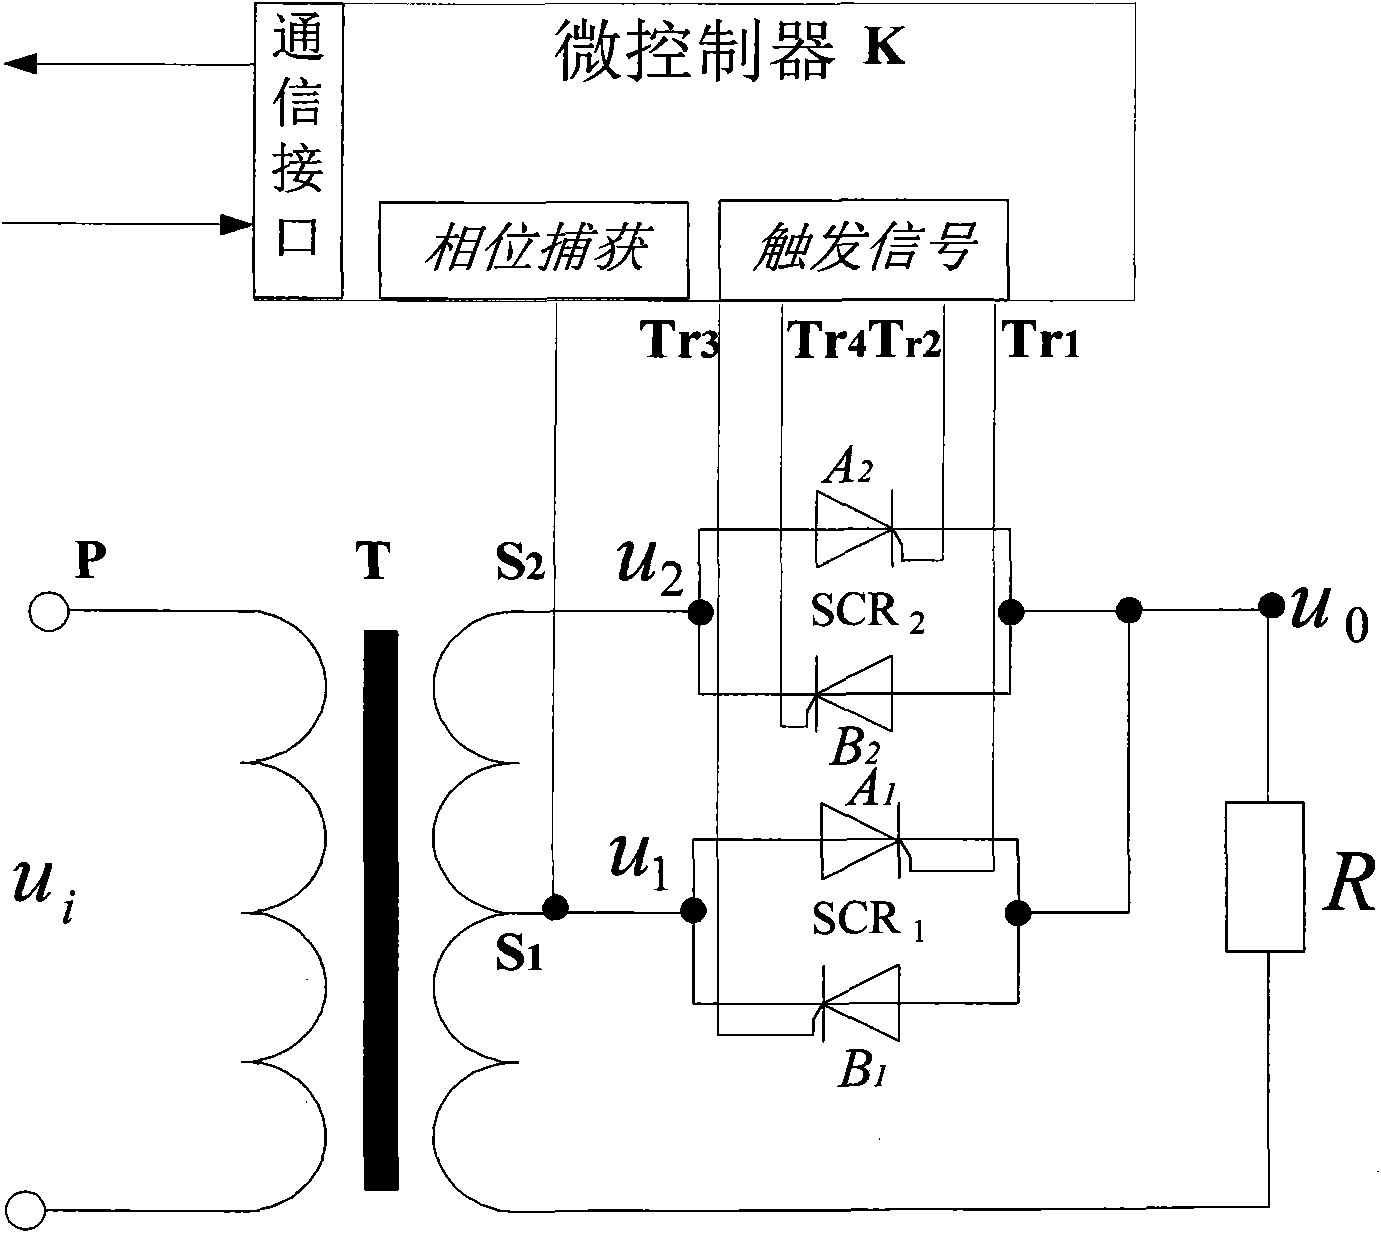 Power regulation device based on controlled silicon